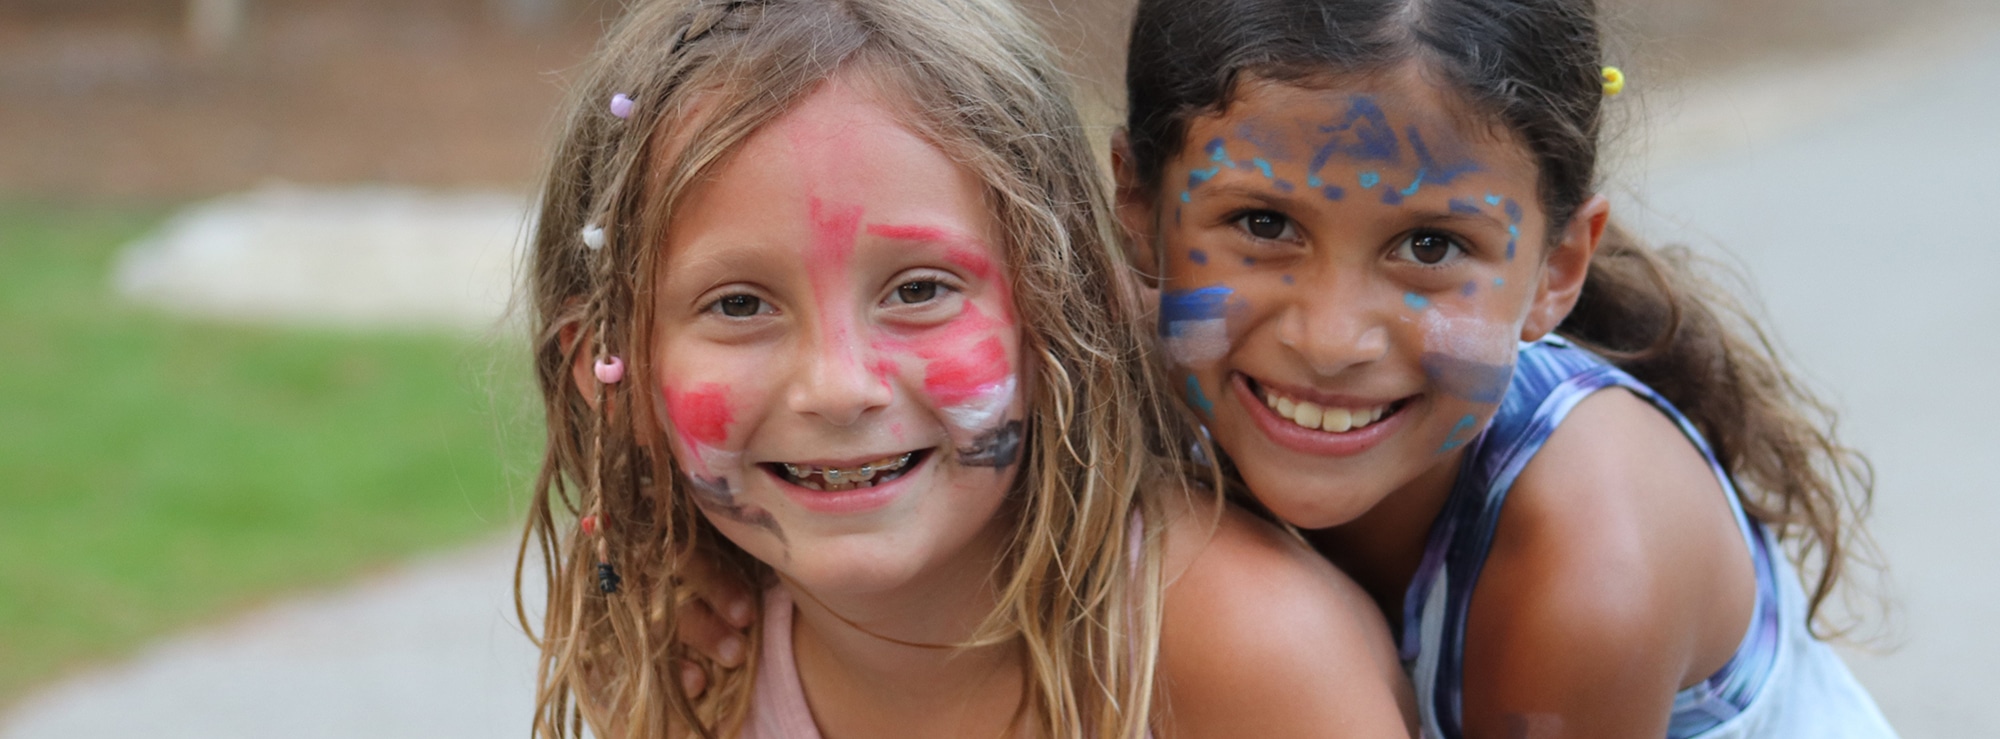 Two joyful campers with Athenian and Spartan face paint smiling at the camera.